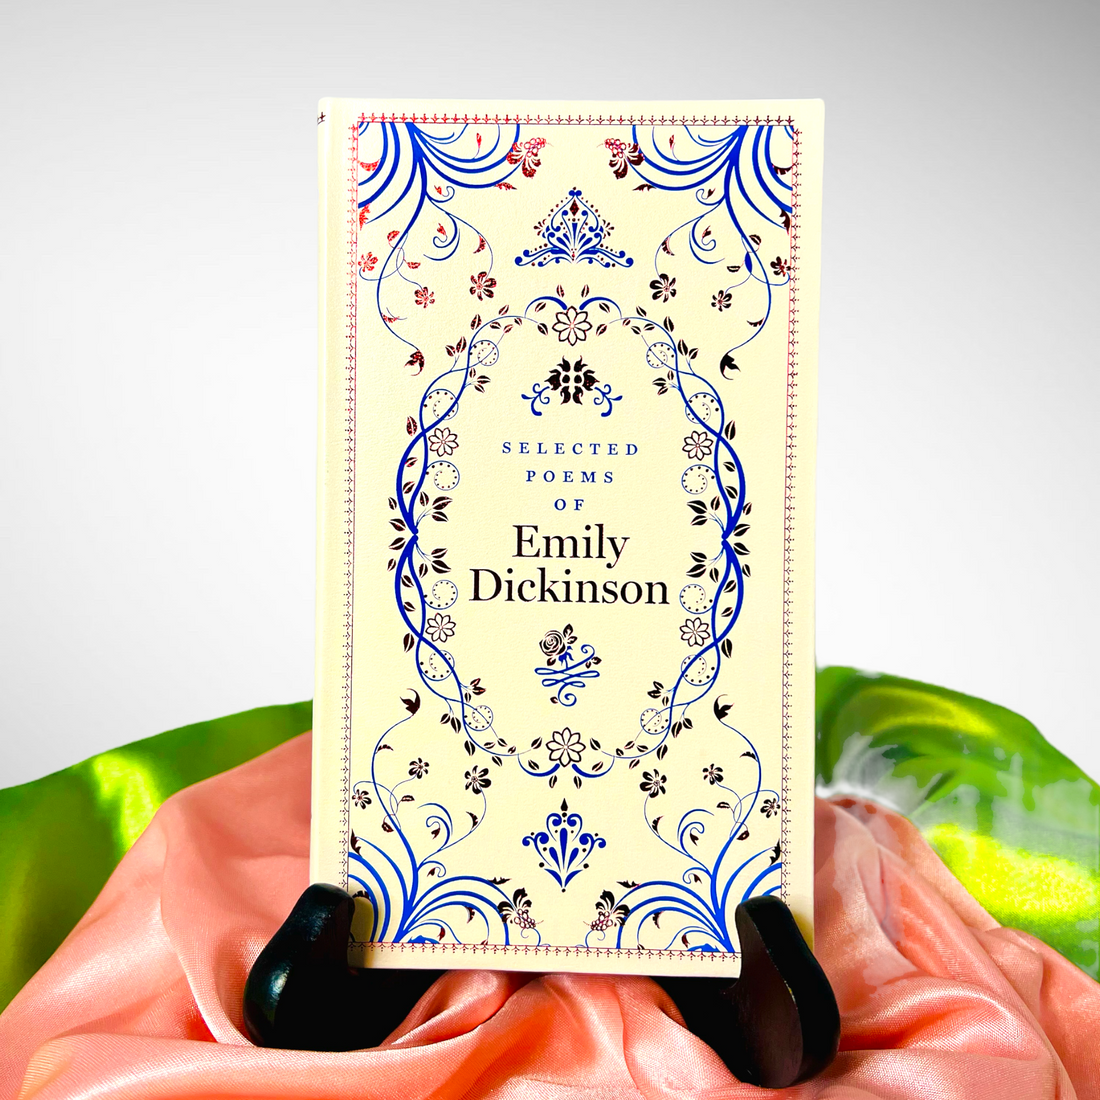 SELECTED POEMS OF EMILY DICKINSON &amp; ART BOOKMARK